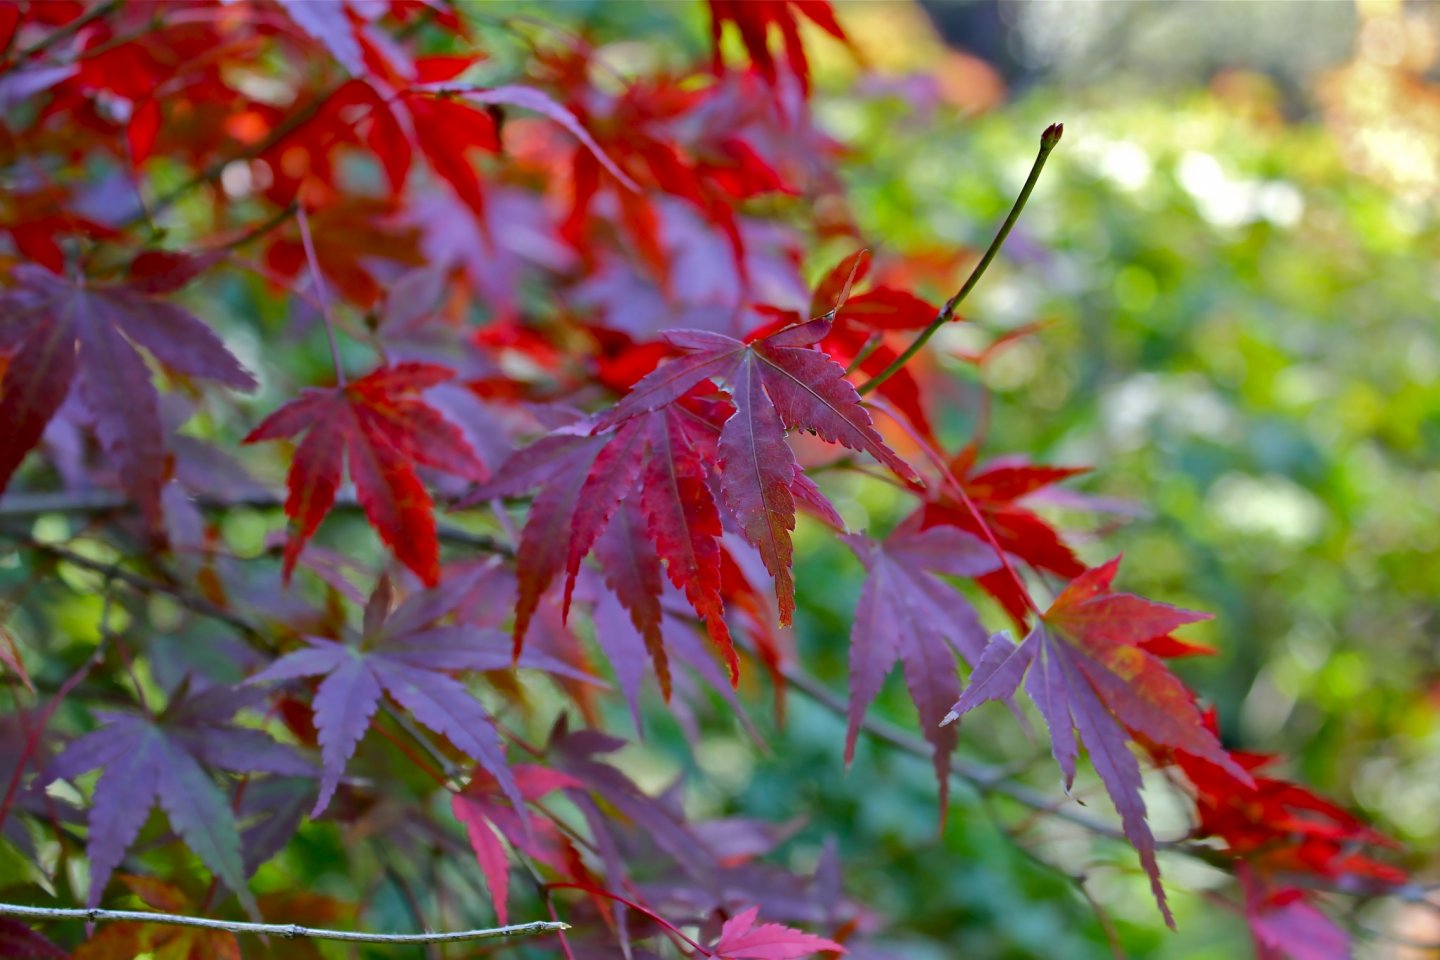 Red maple leaves are a sure sign of Autumn